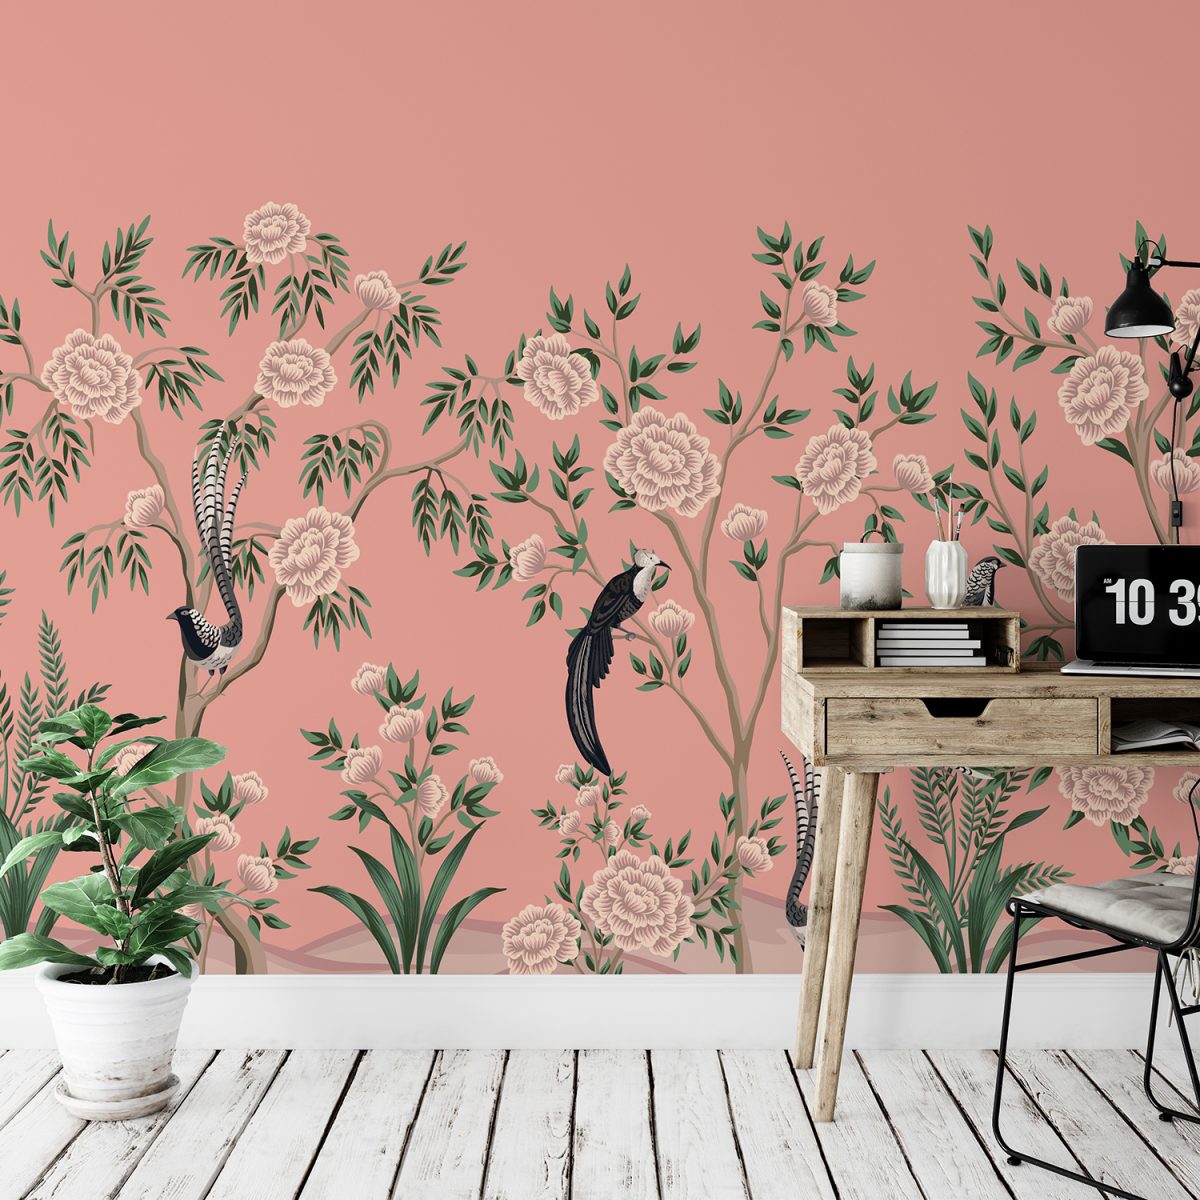 Vintage Chinoiserie Floral Wallpaper Mural